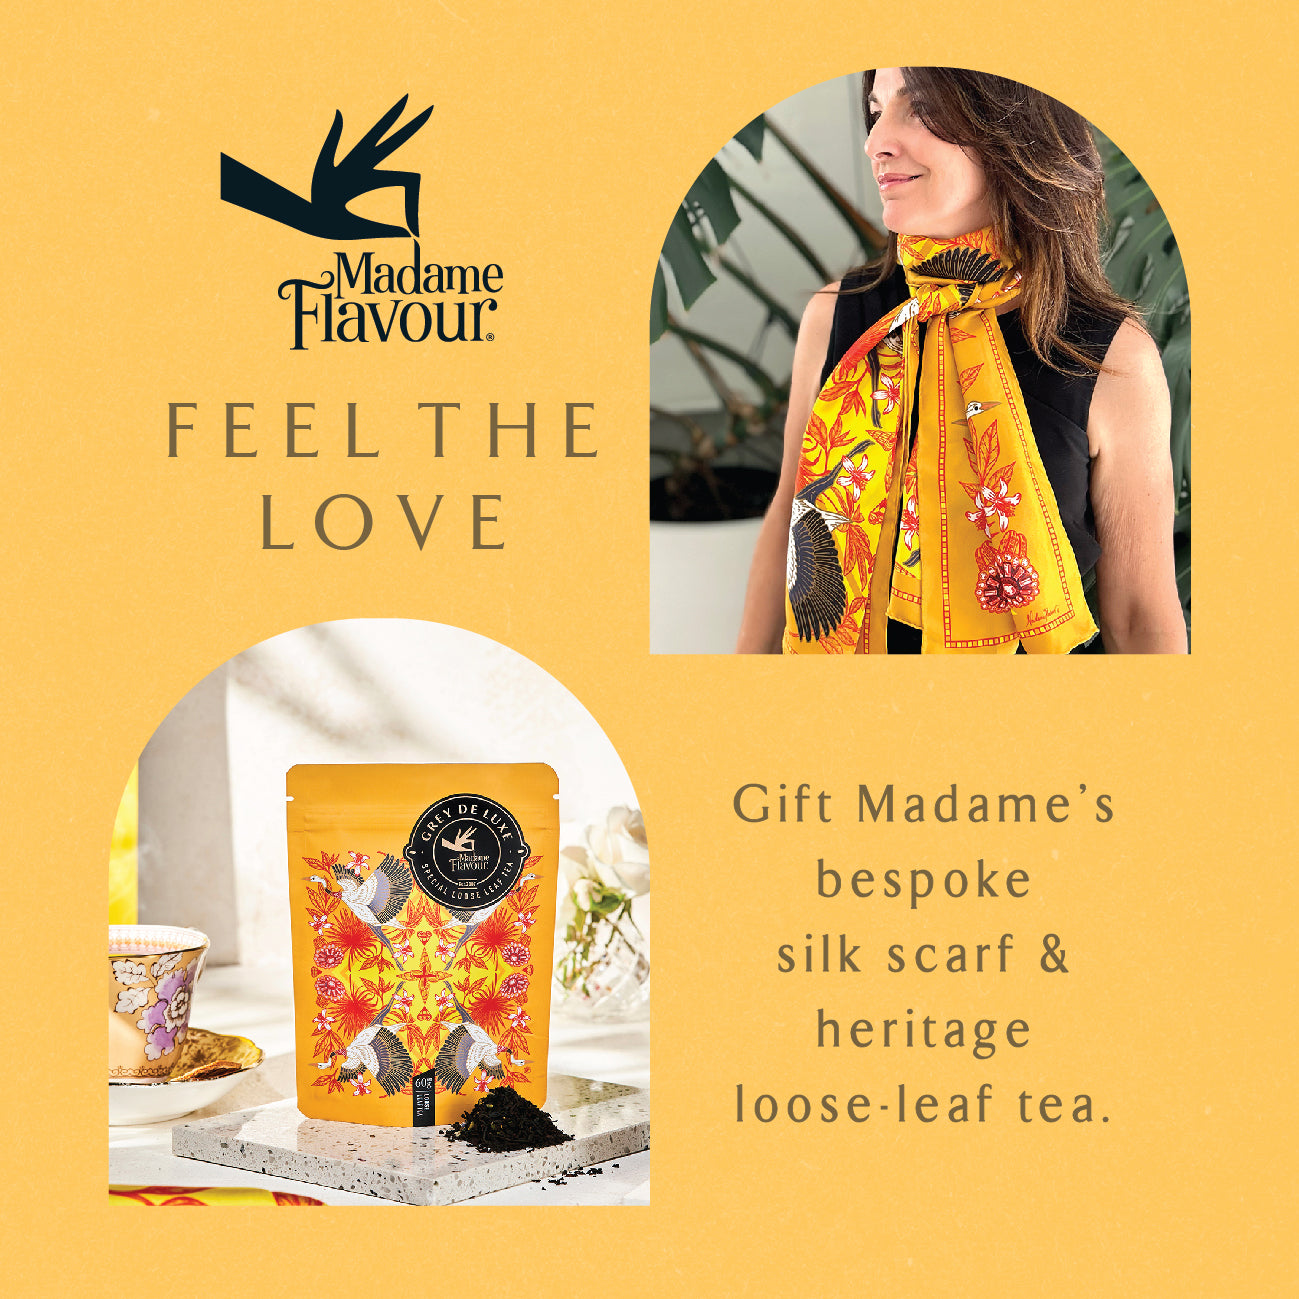 Madame's Grey De Luxe Loose Leaf & Scarf Gift set